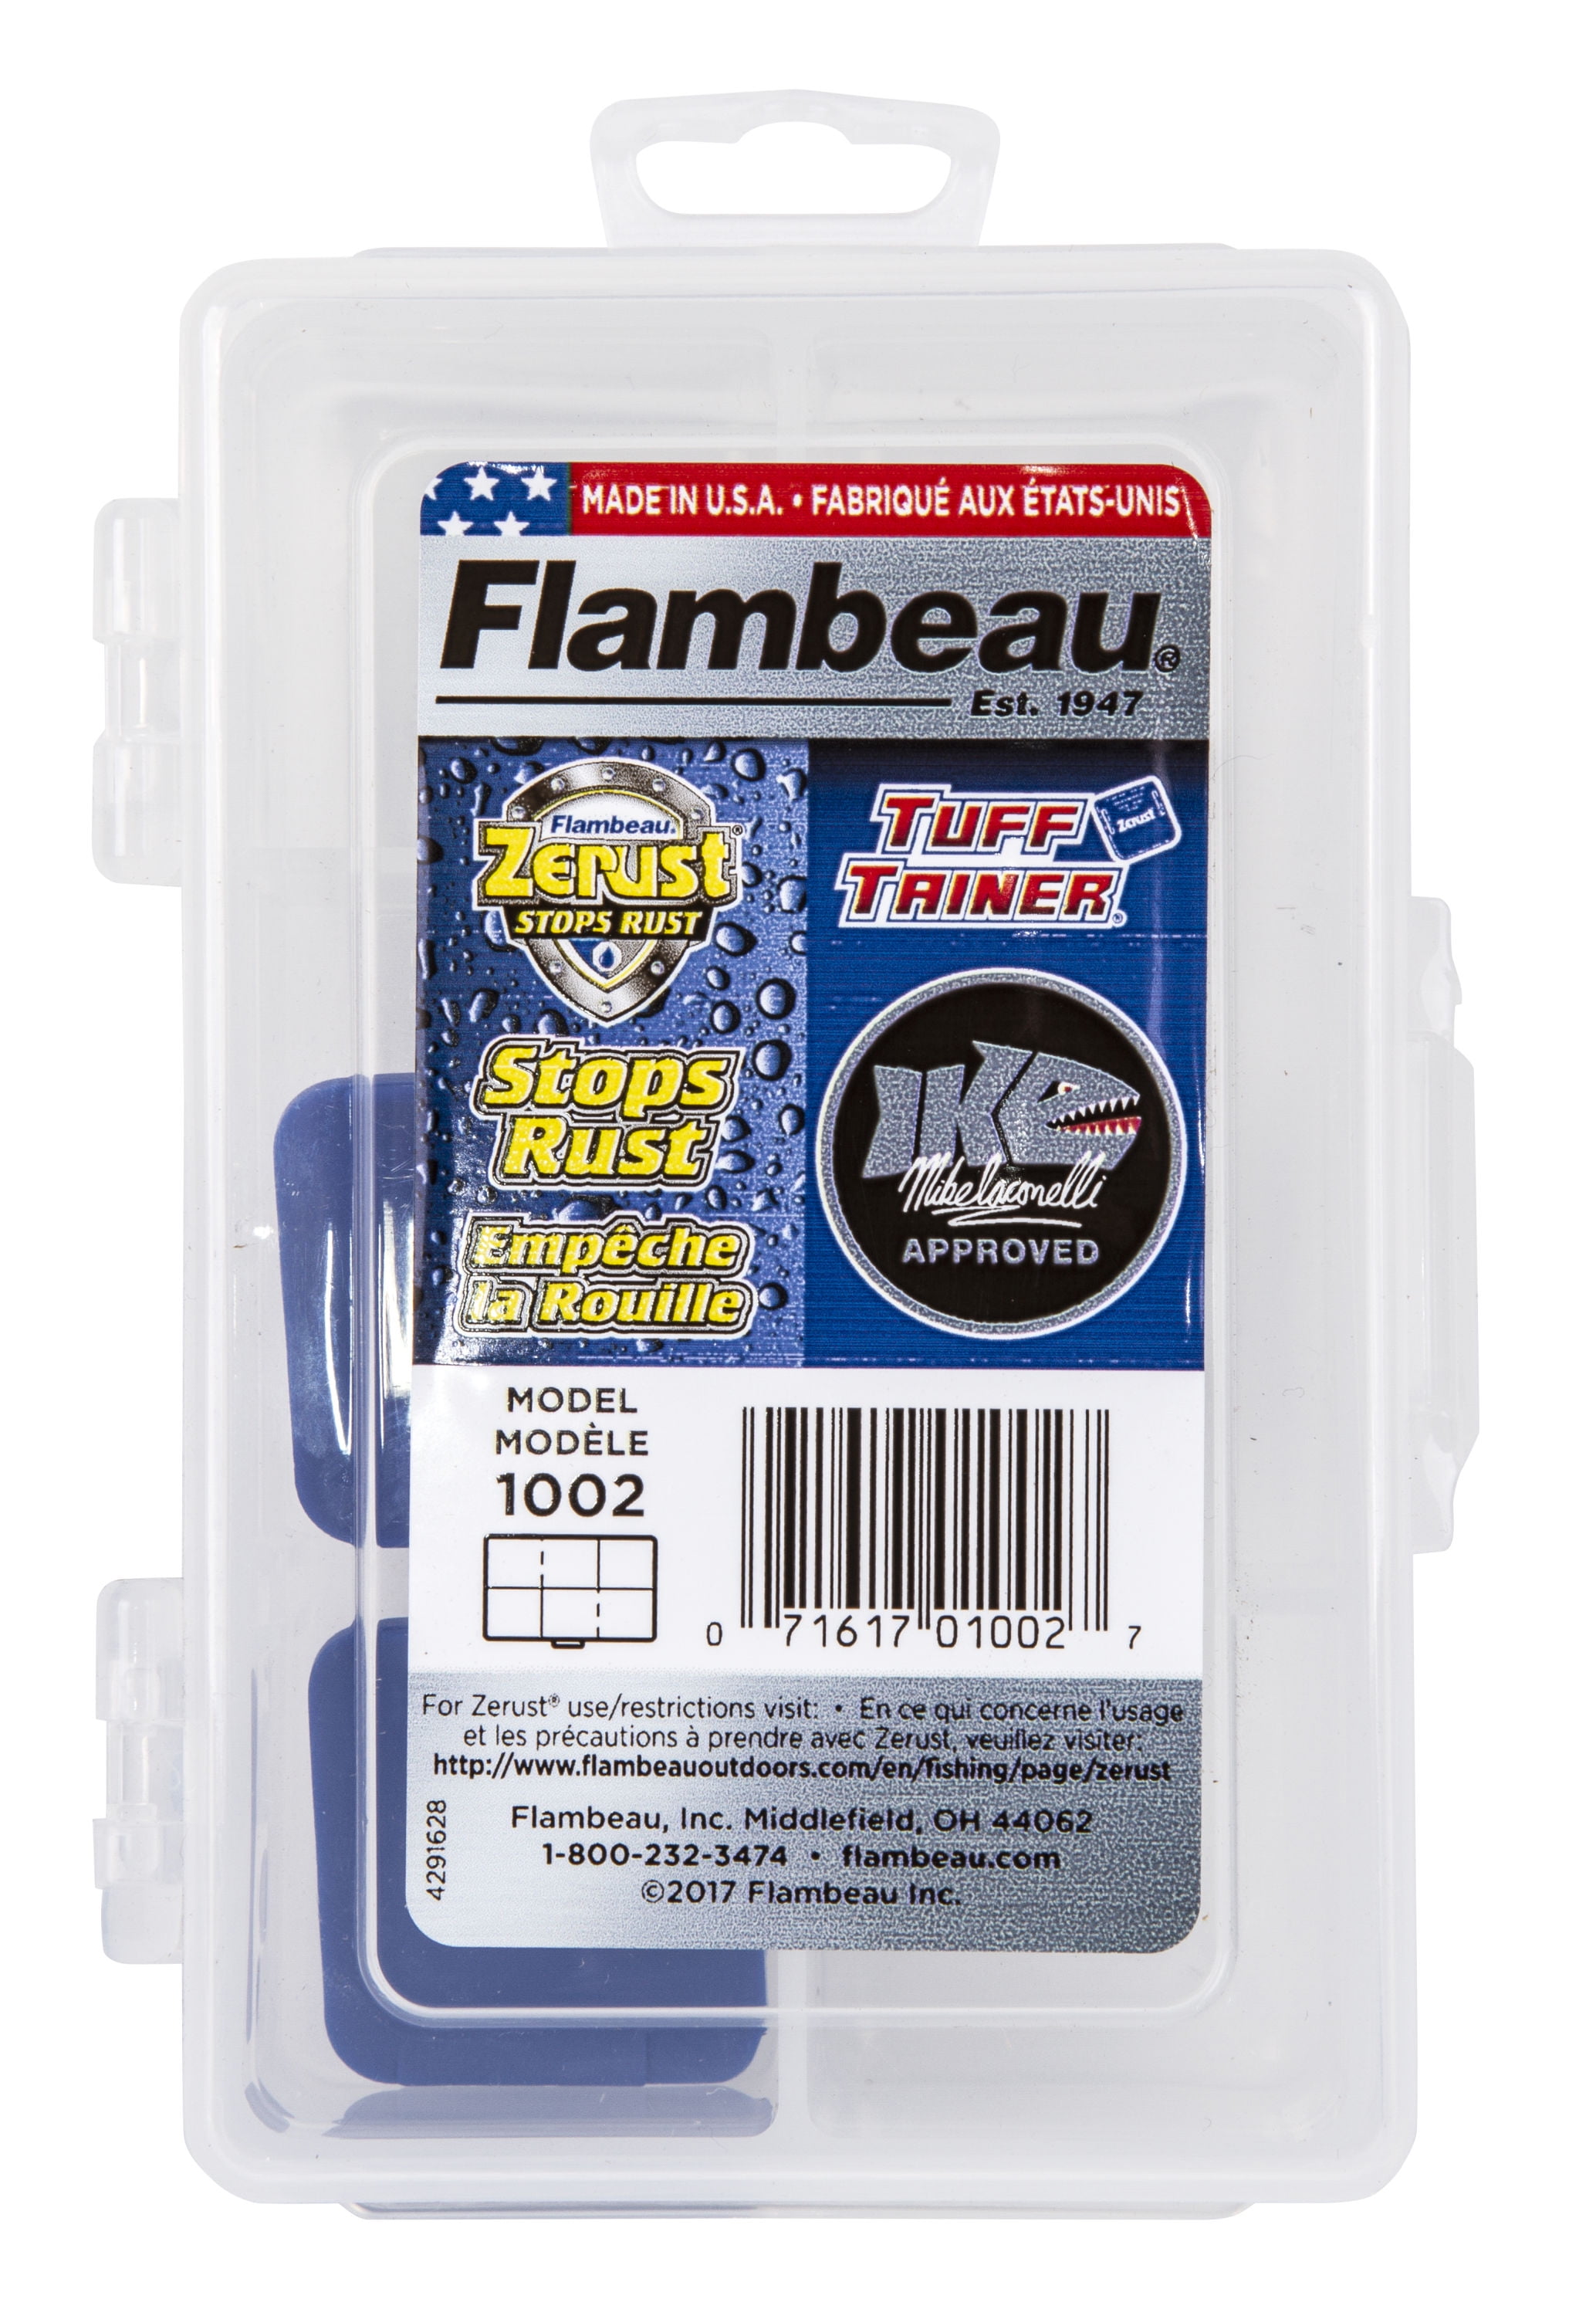 Flambeau Tuff Tainer - 2 Sizes Available - Lakewood Products